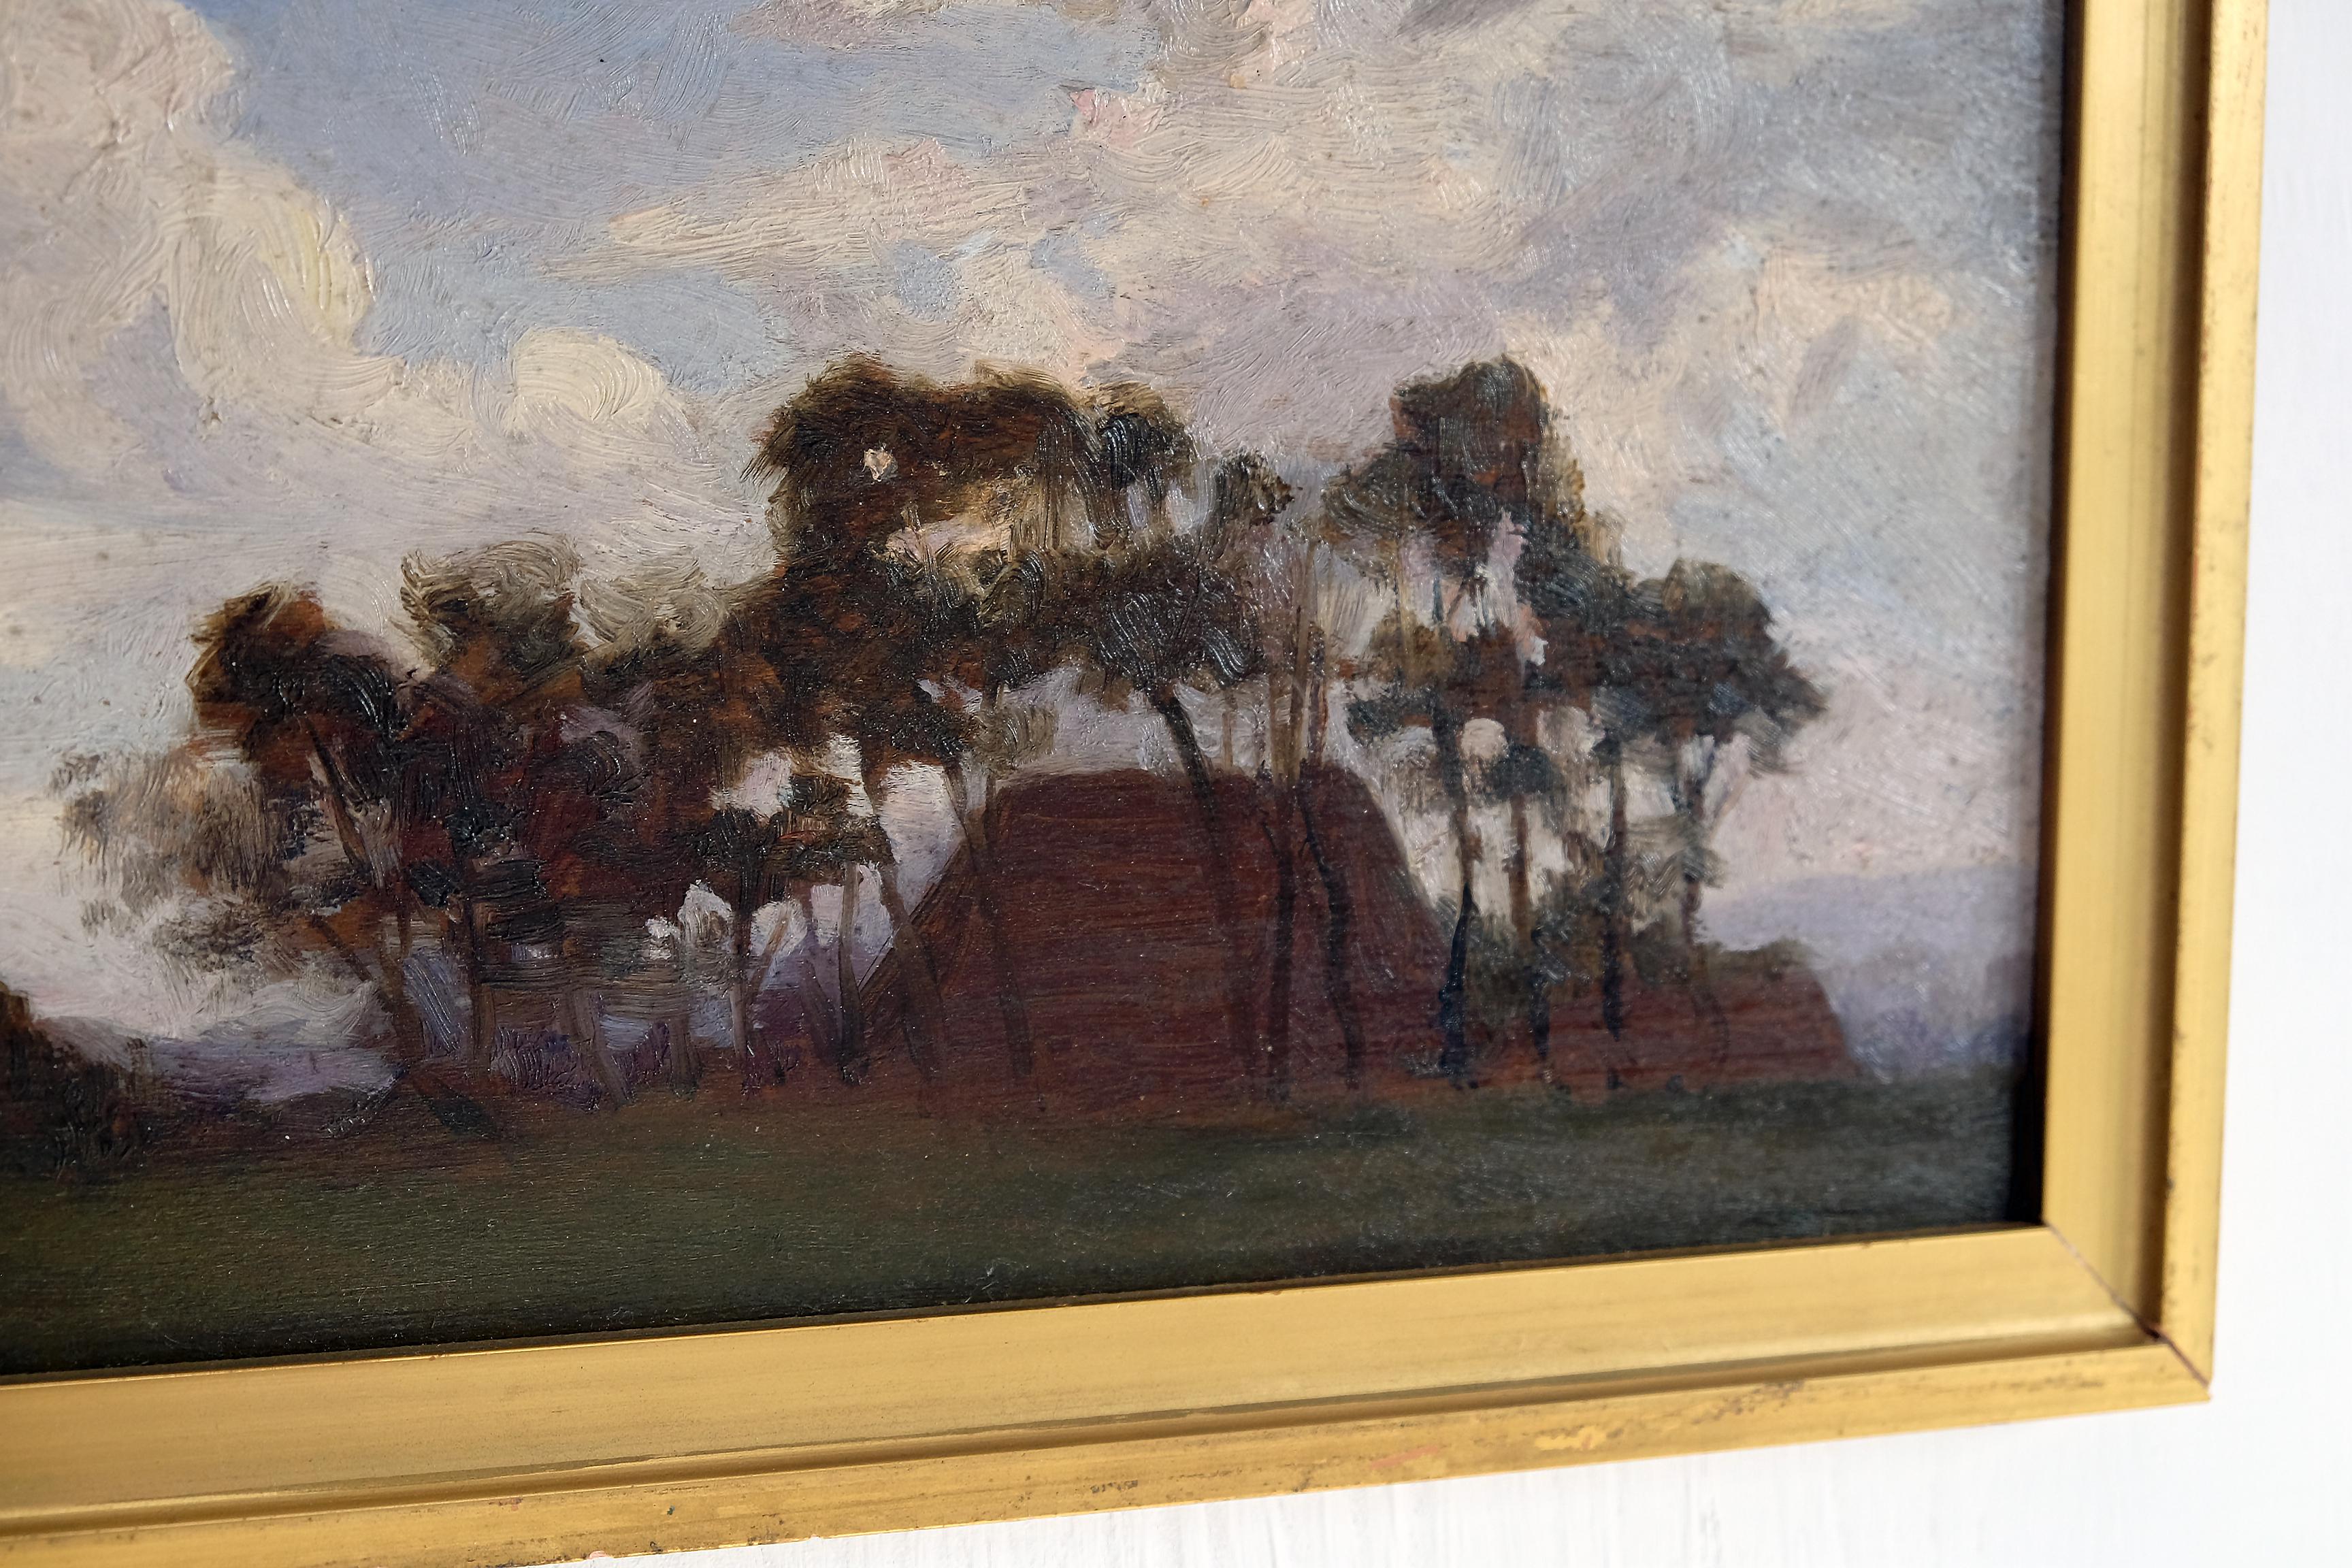 A wonderful British post-impressionist oil on board by the Hon. Violet Maud Biddulph, (1868-1960).

Violet Maud Biddulph was the daughter of the 1st Baron Biddulph and her artistic work flourished in the early years of the 20th century.
A